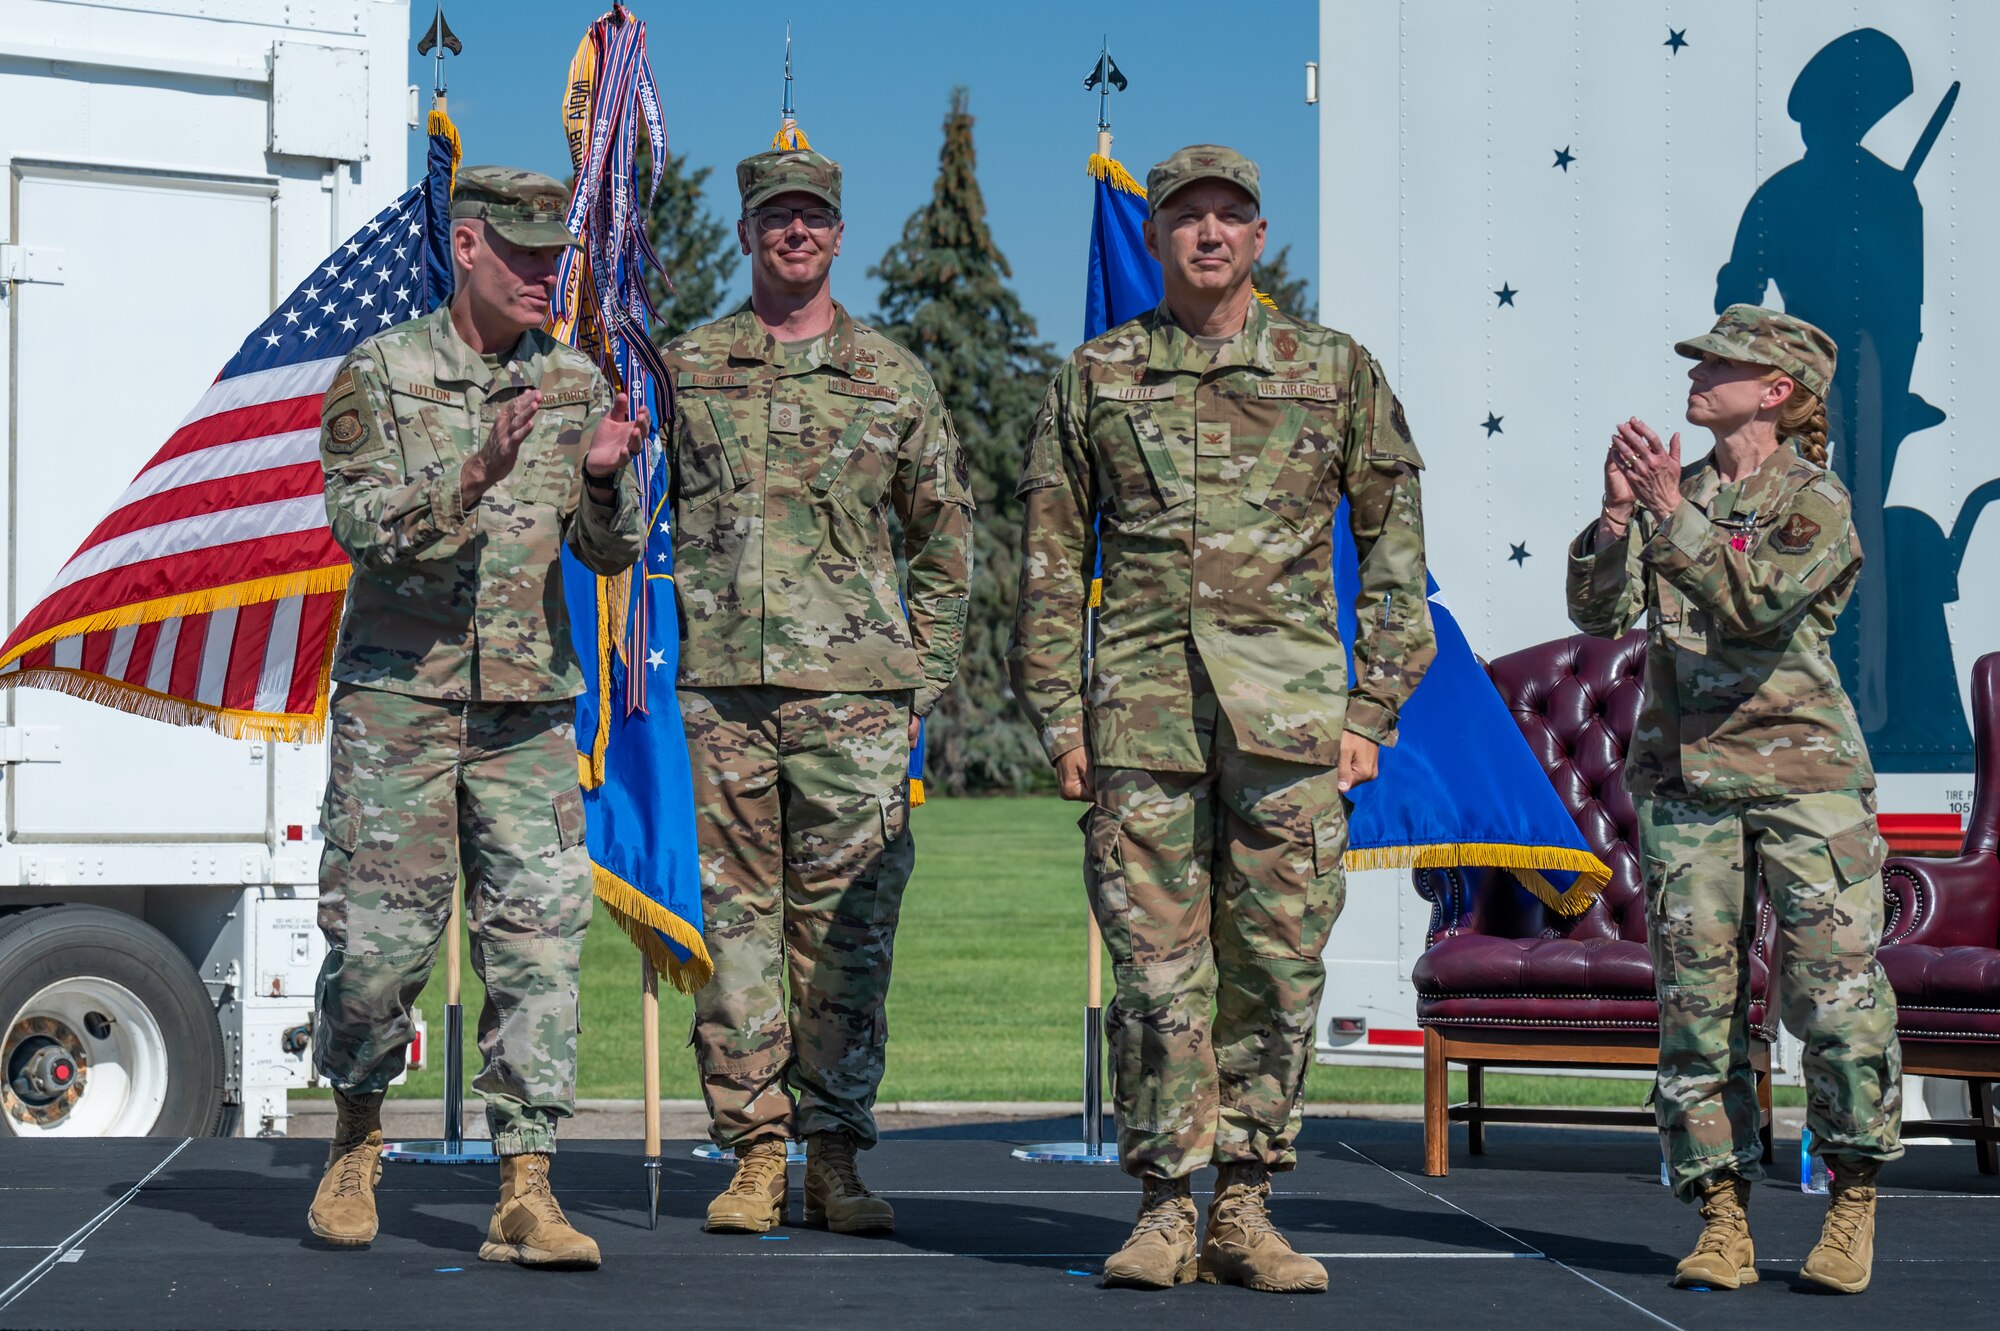 Maj. Gen. Michael Lutton, far left, 20th Air Force commander and Col. Anita Feugate Opperman, far right, 341st Missile Wing outgoing commander, applaud Col. Barry Little, right center, 341st Missile Wing incoming commander, while Chief Master Sgt. Michael Becker, left center, 341st MW command chief, looks on during a change of command ceremony July 18, 2022, at Malmstrom Air Force Base Mont.